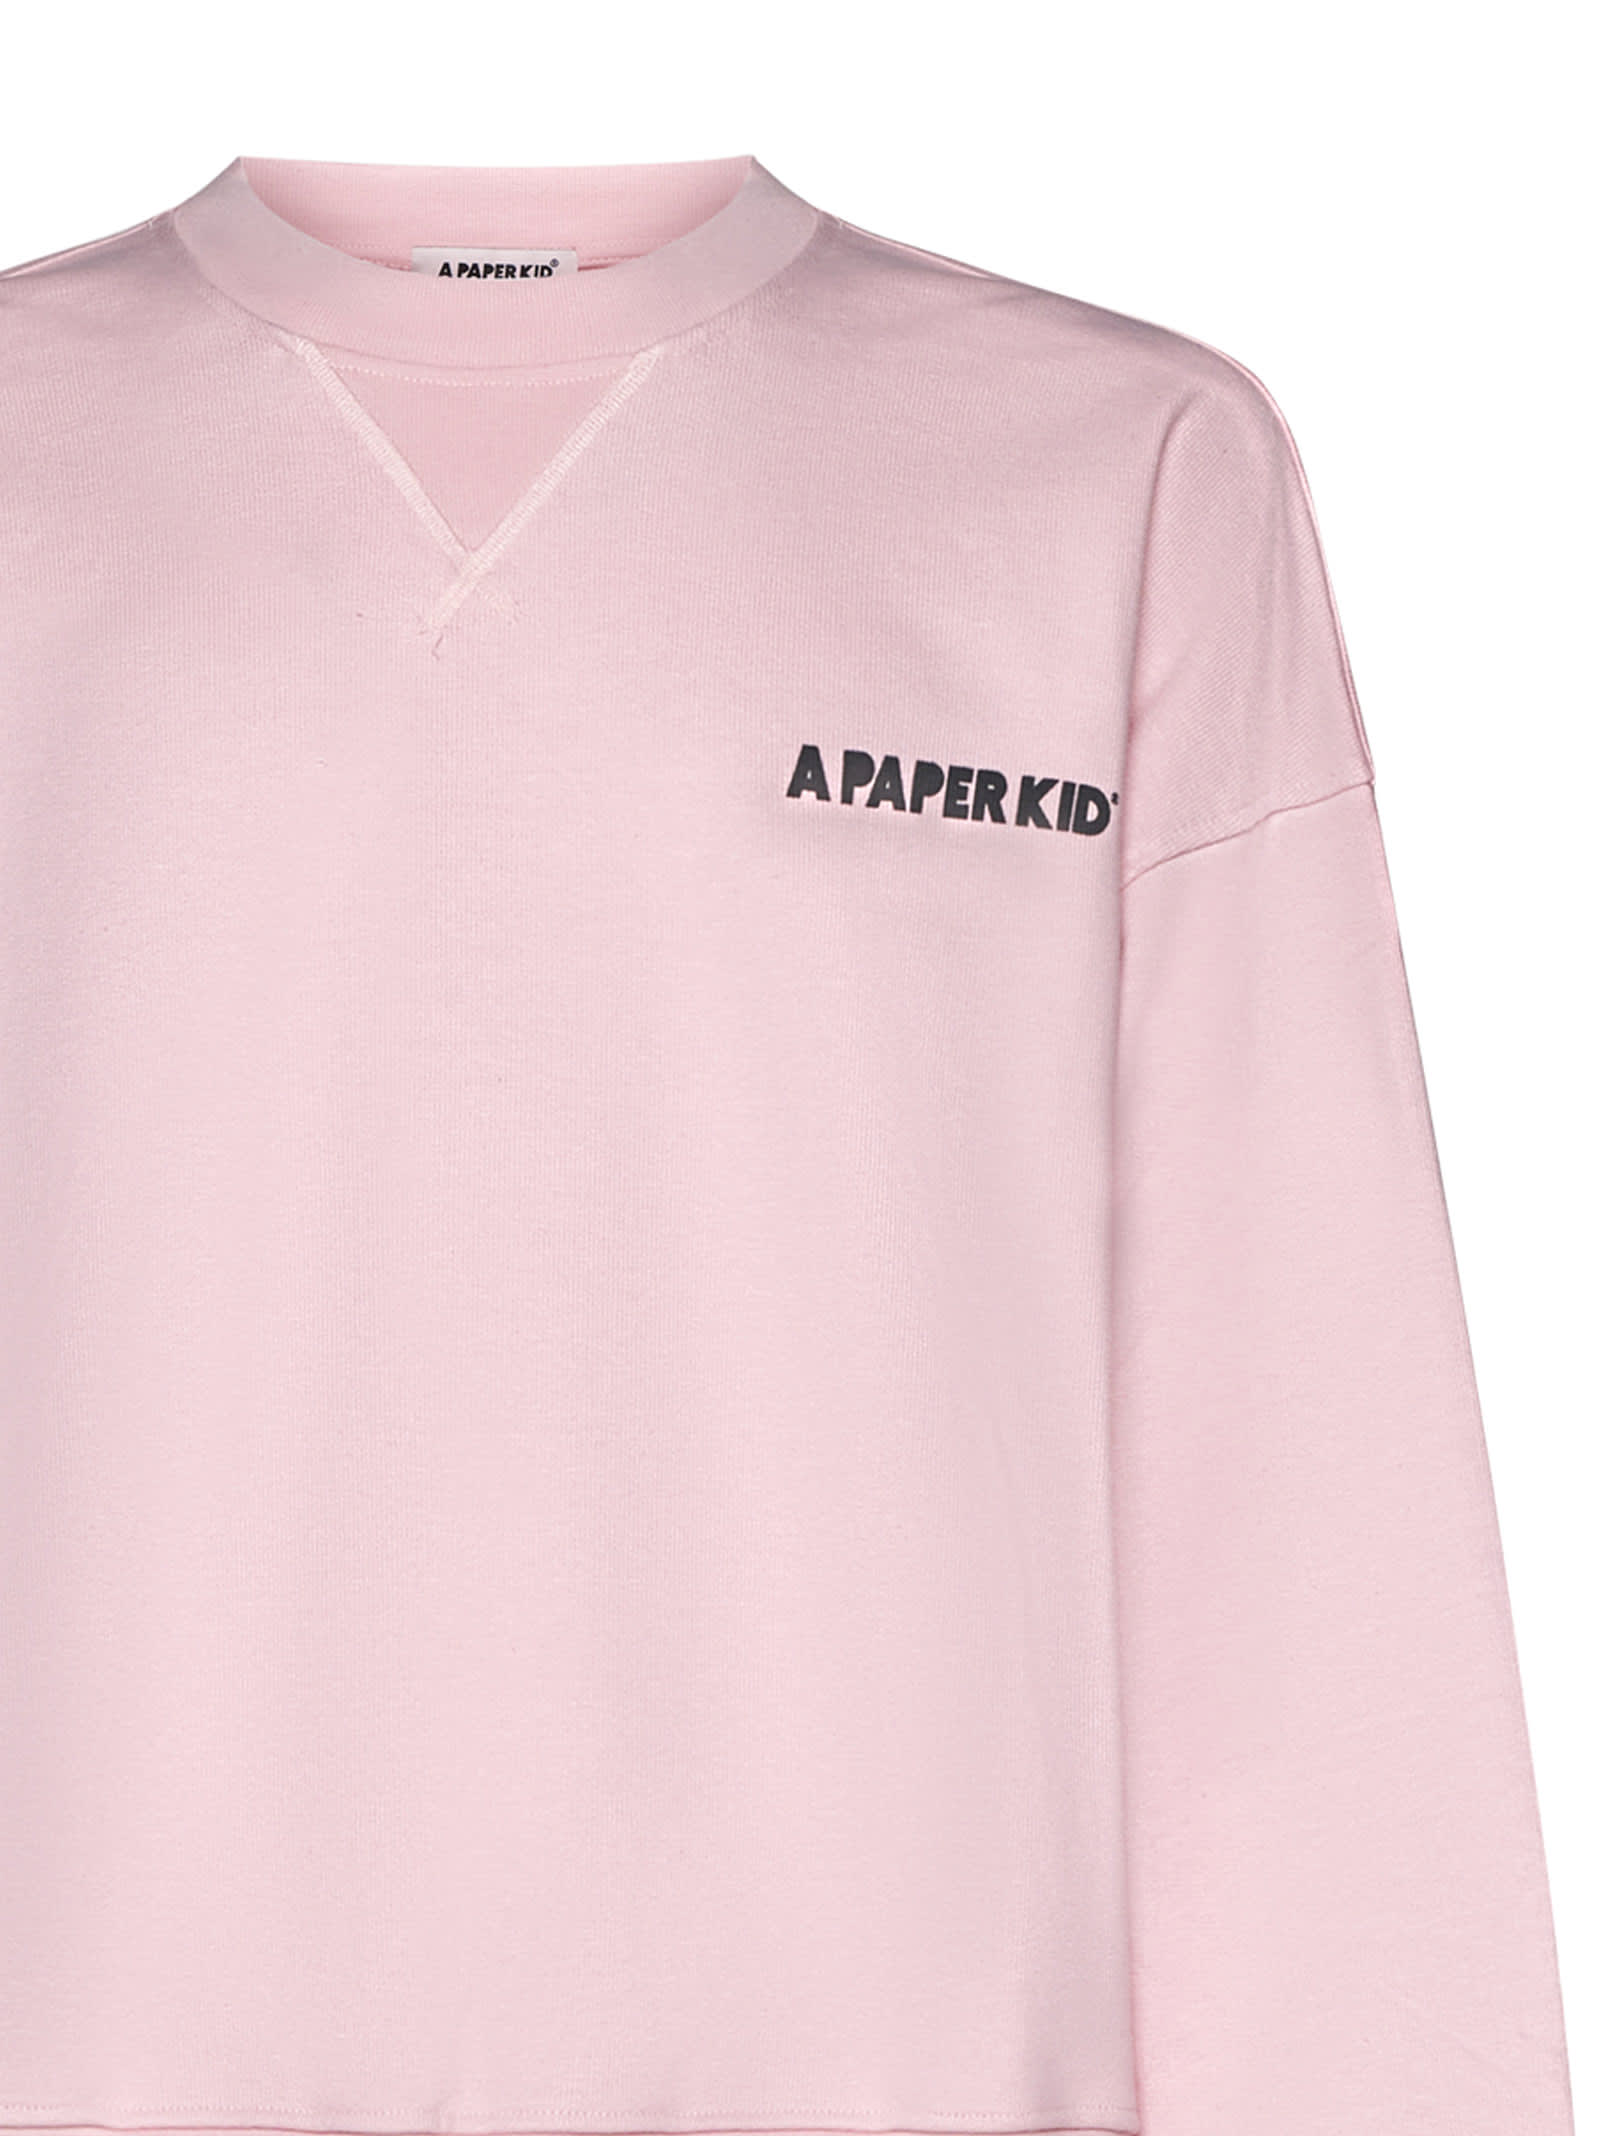 Shop A Paper Kid Sweater In Pink